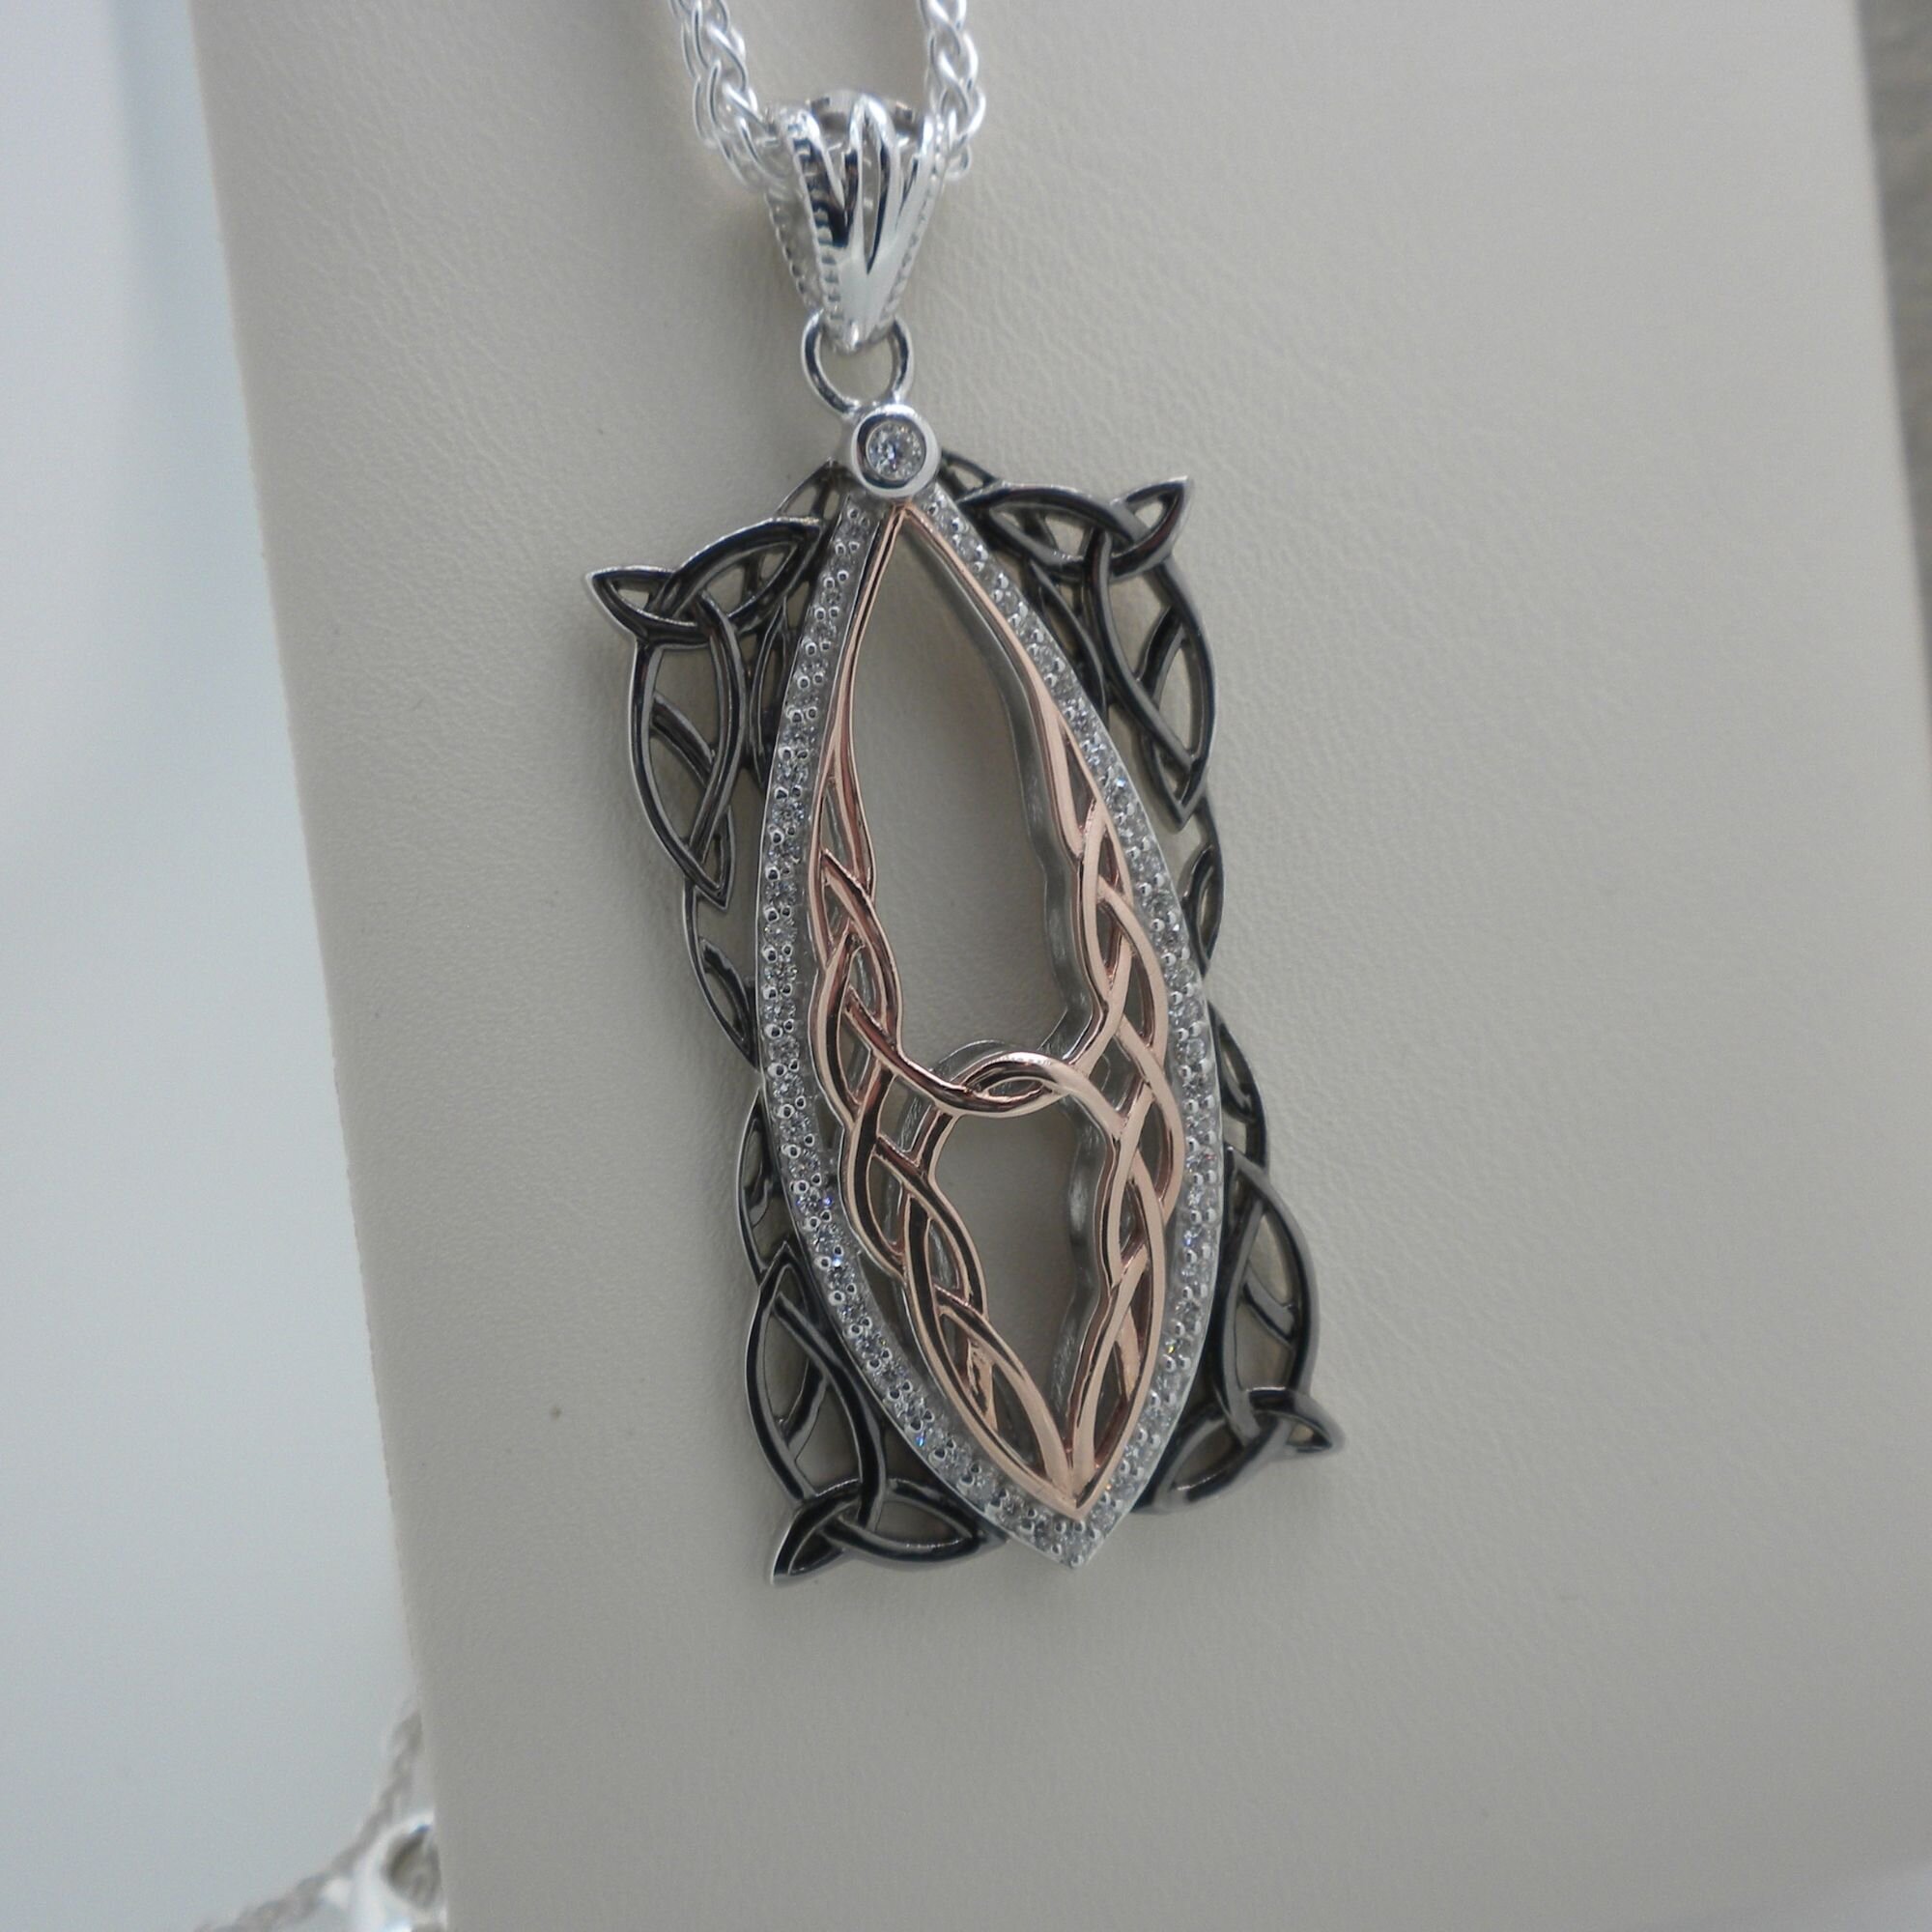 Gatway Pendant by Keith Jack